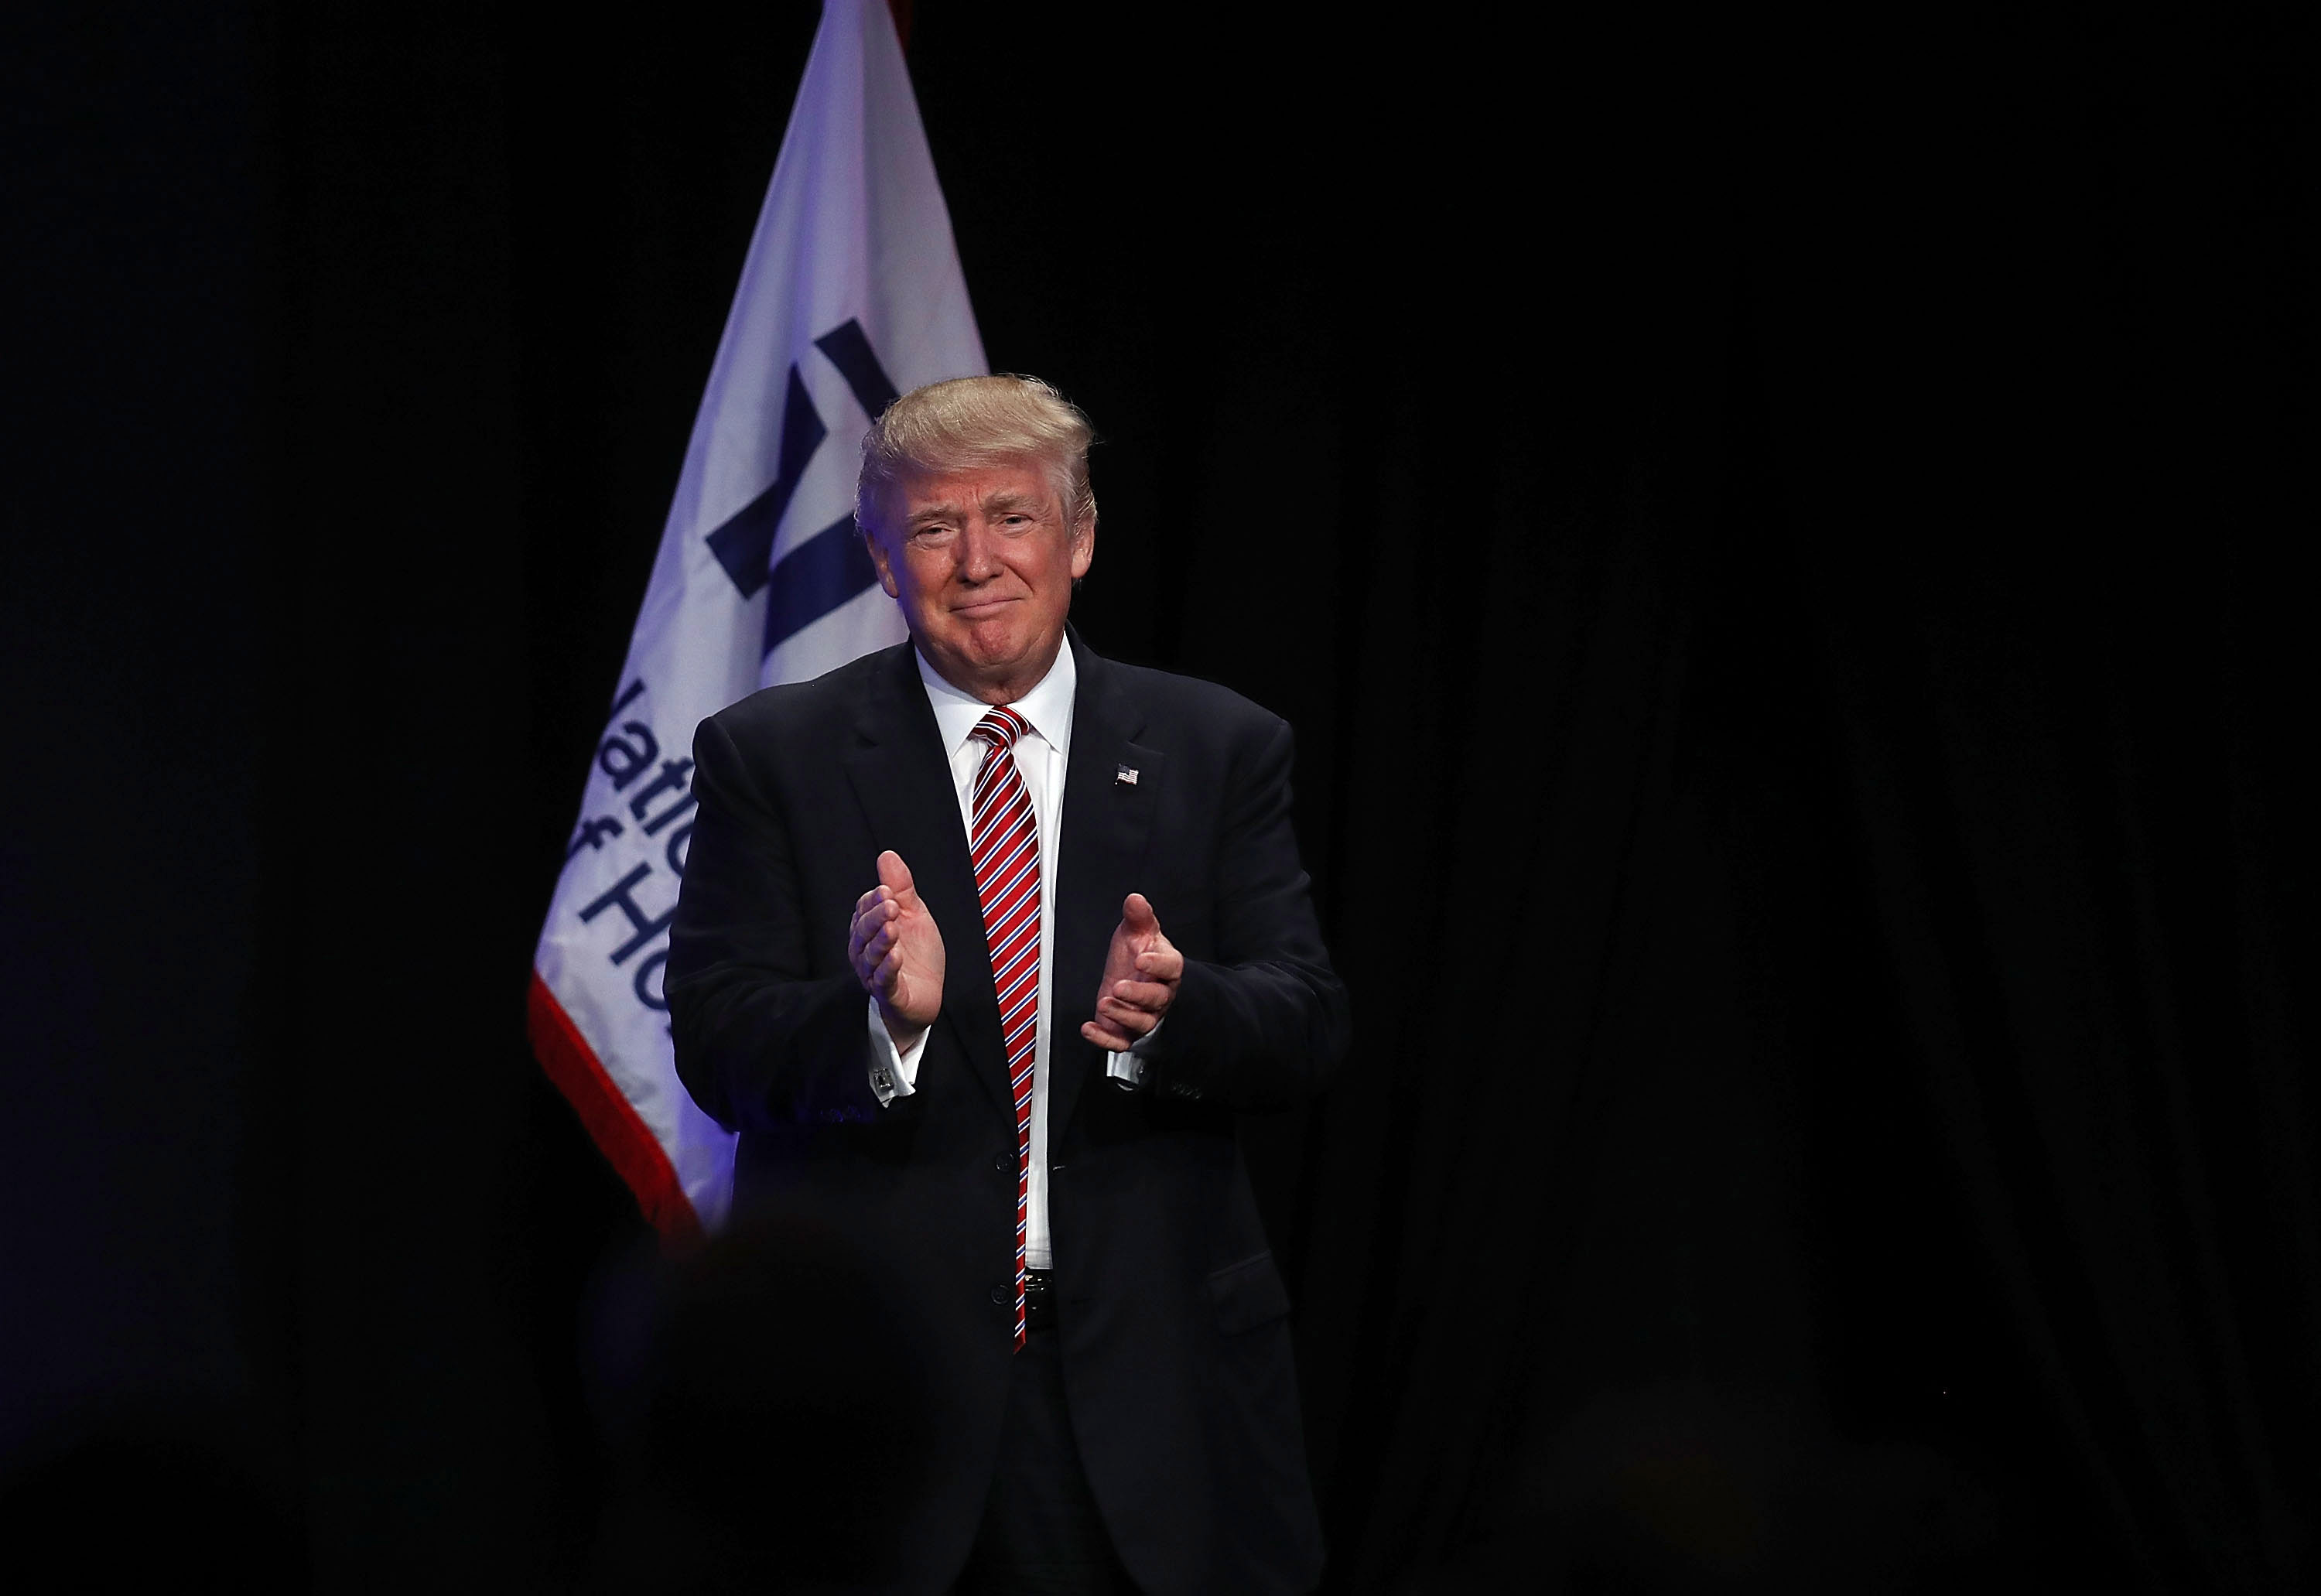 Donald Trump Addresses The National Association Of Home Builders Conference In Miami Beach